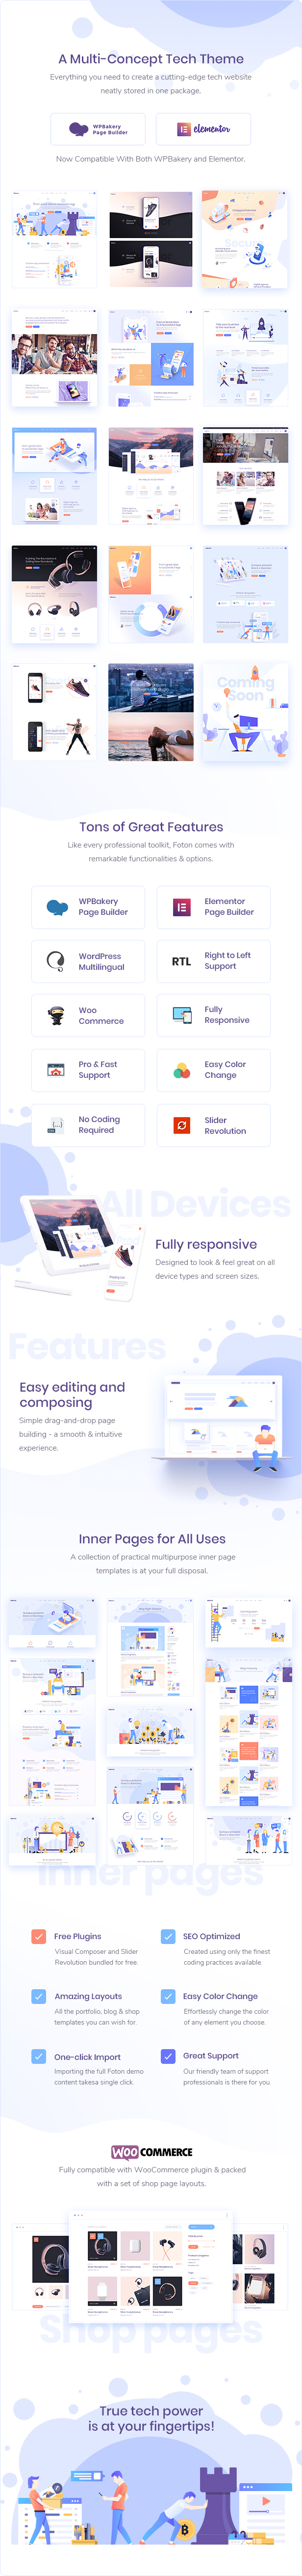 Foton - Application and Software Landing Page Theme - 1